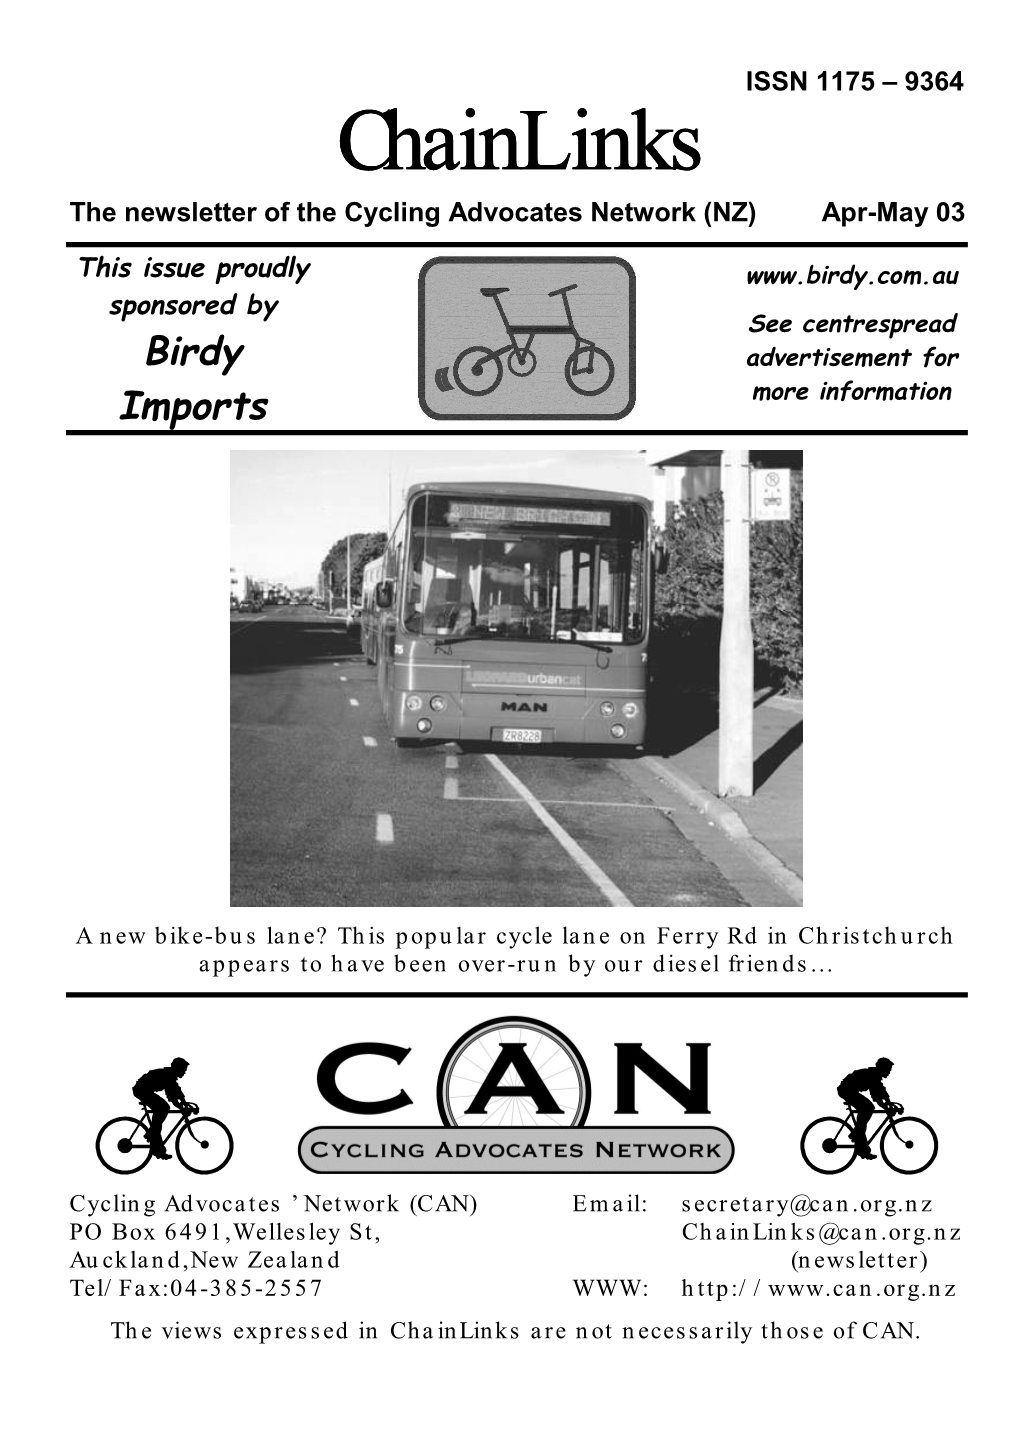 Chainlinks the Newsletter of the Cycling Advocates Network (NZ) Apr-May 03